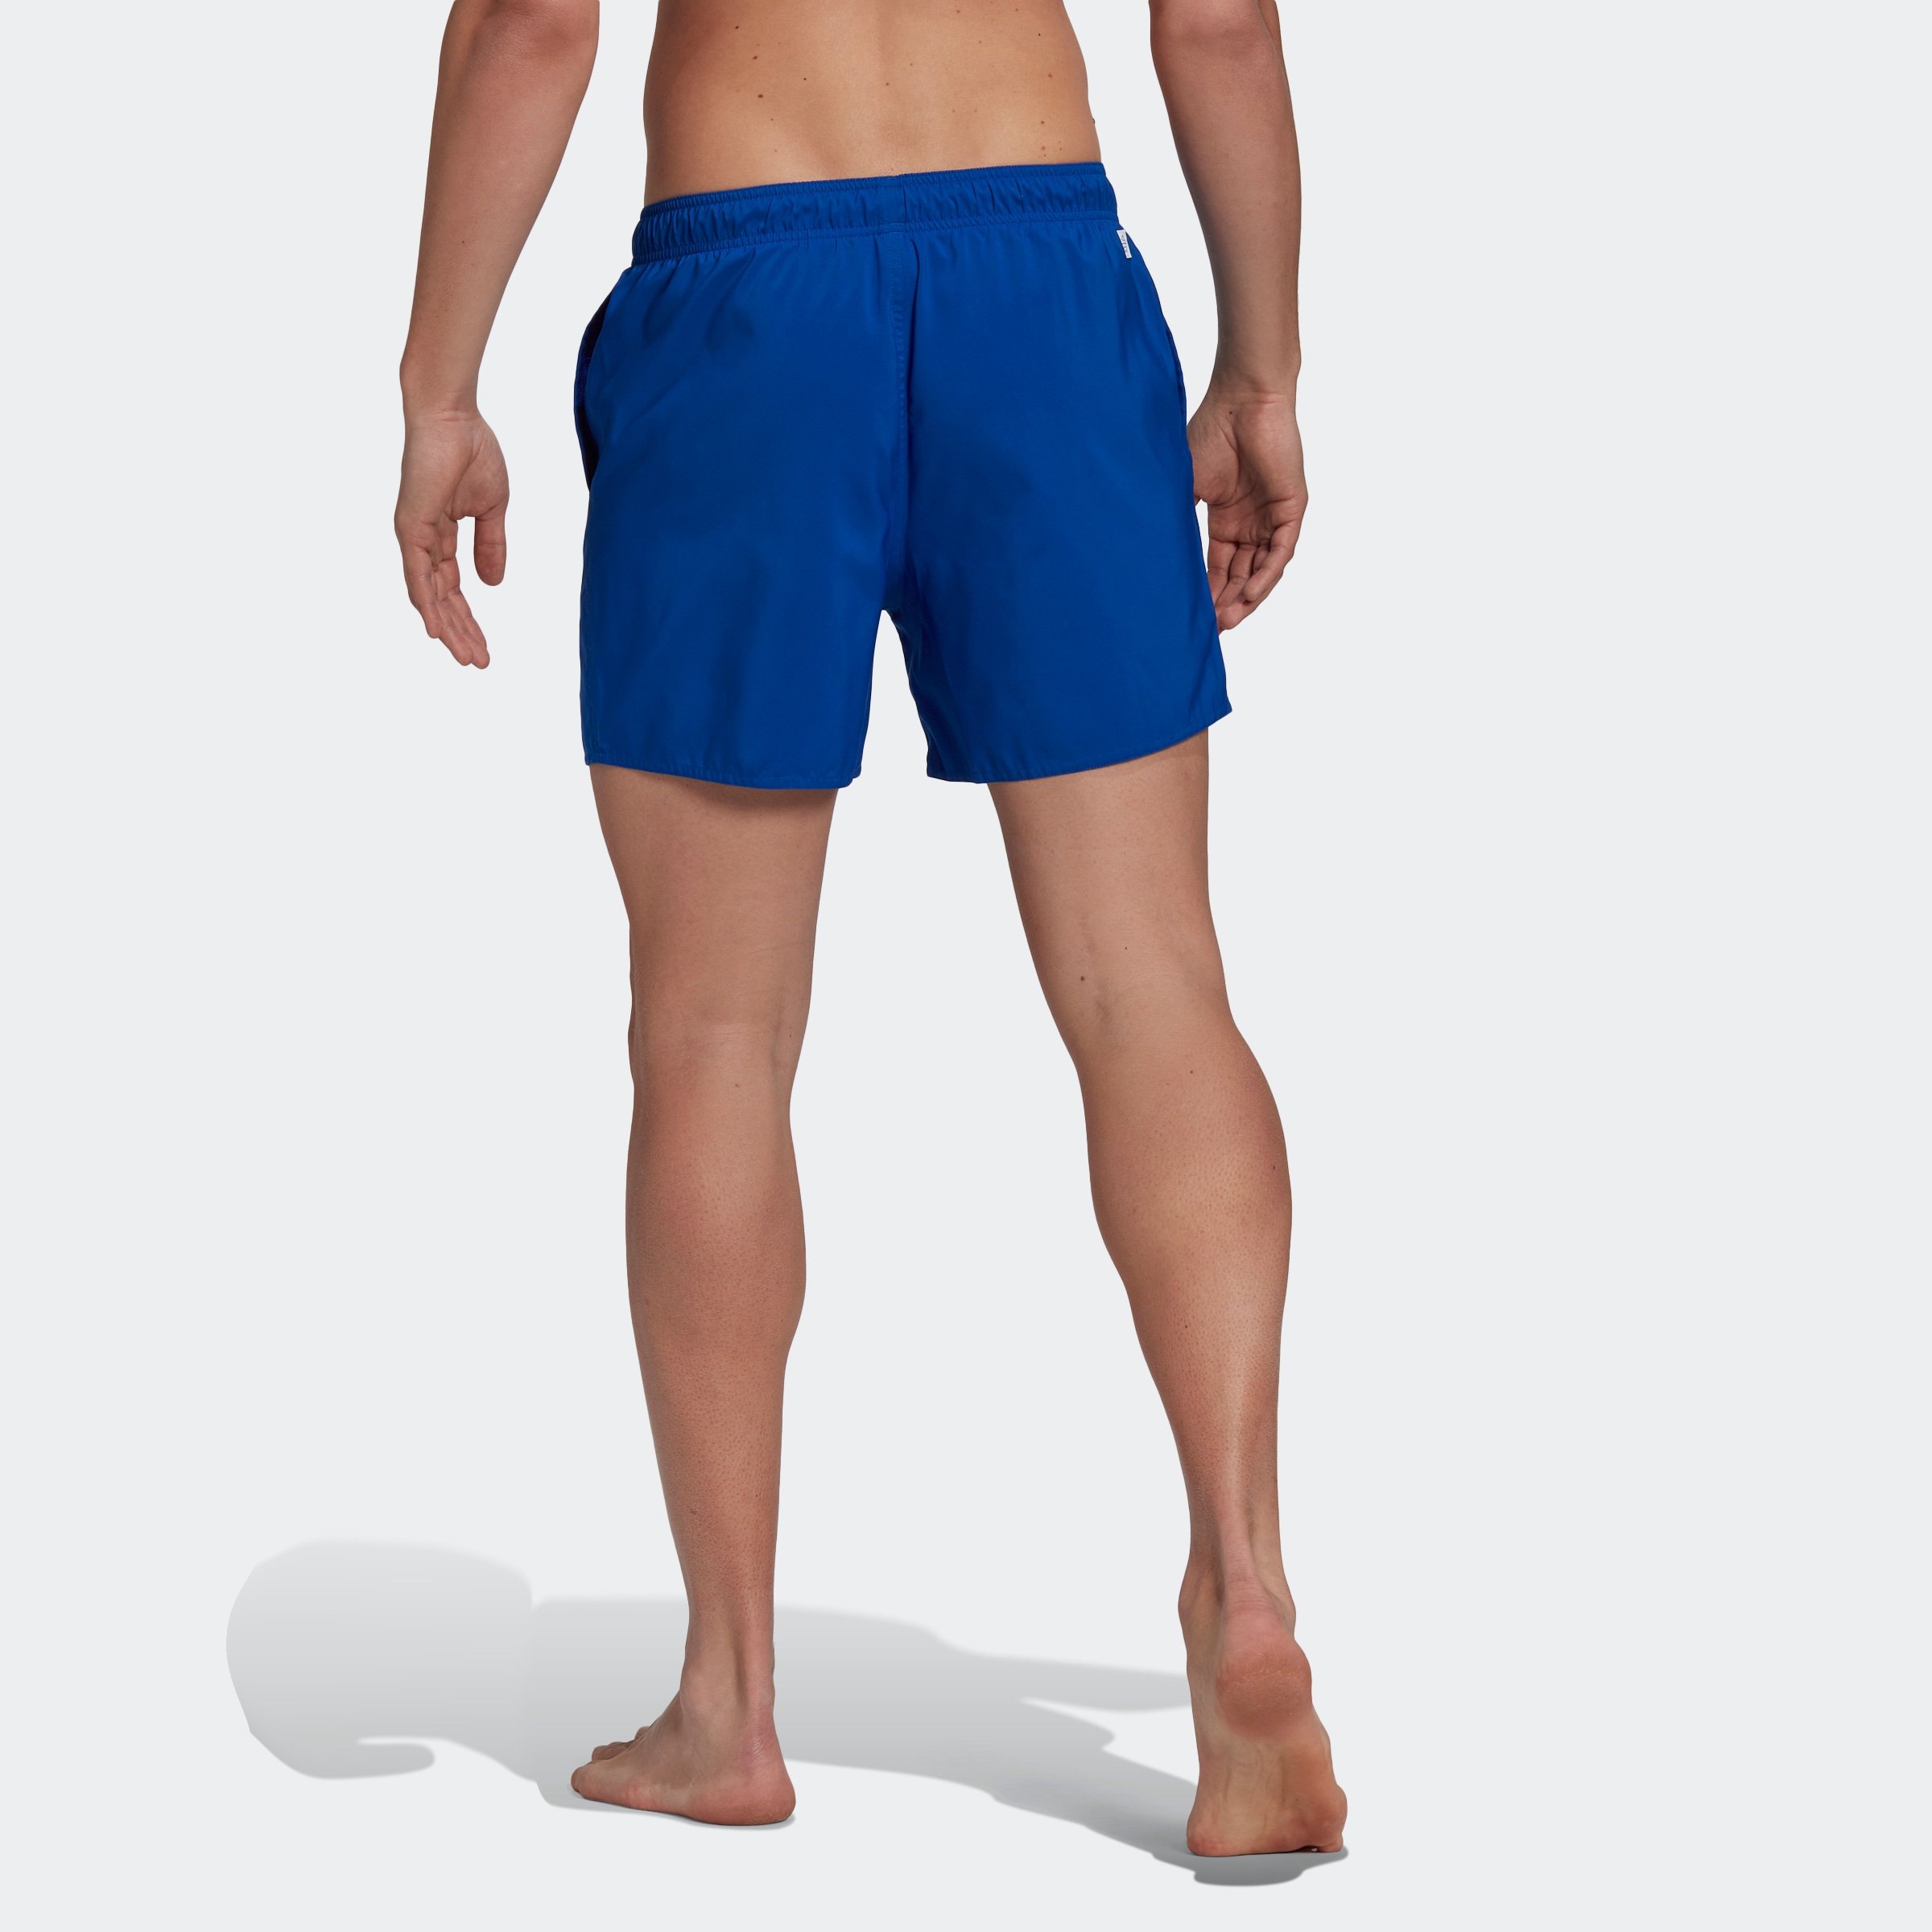 adidas Performance Badehose LENGTH SOLID«, »SHORT St.) bei (1